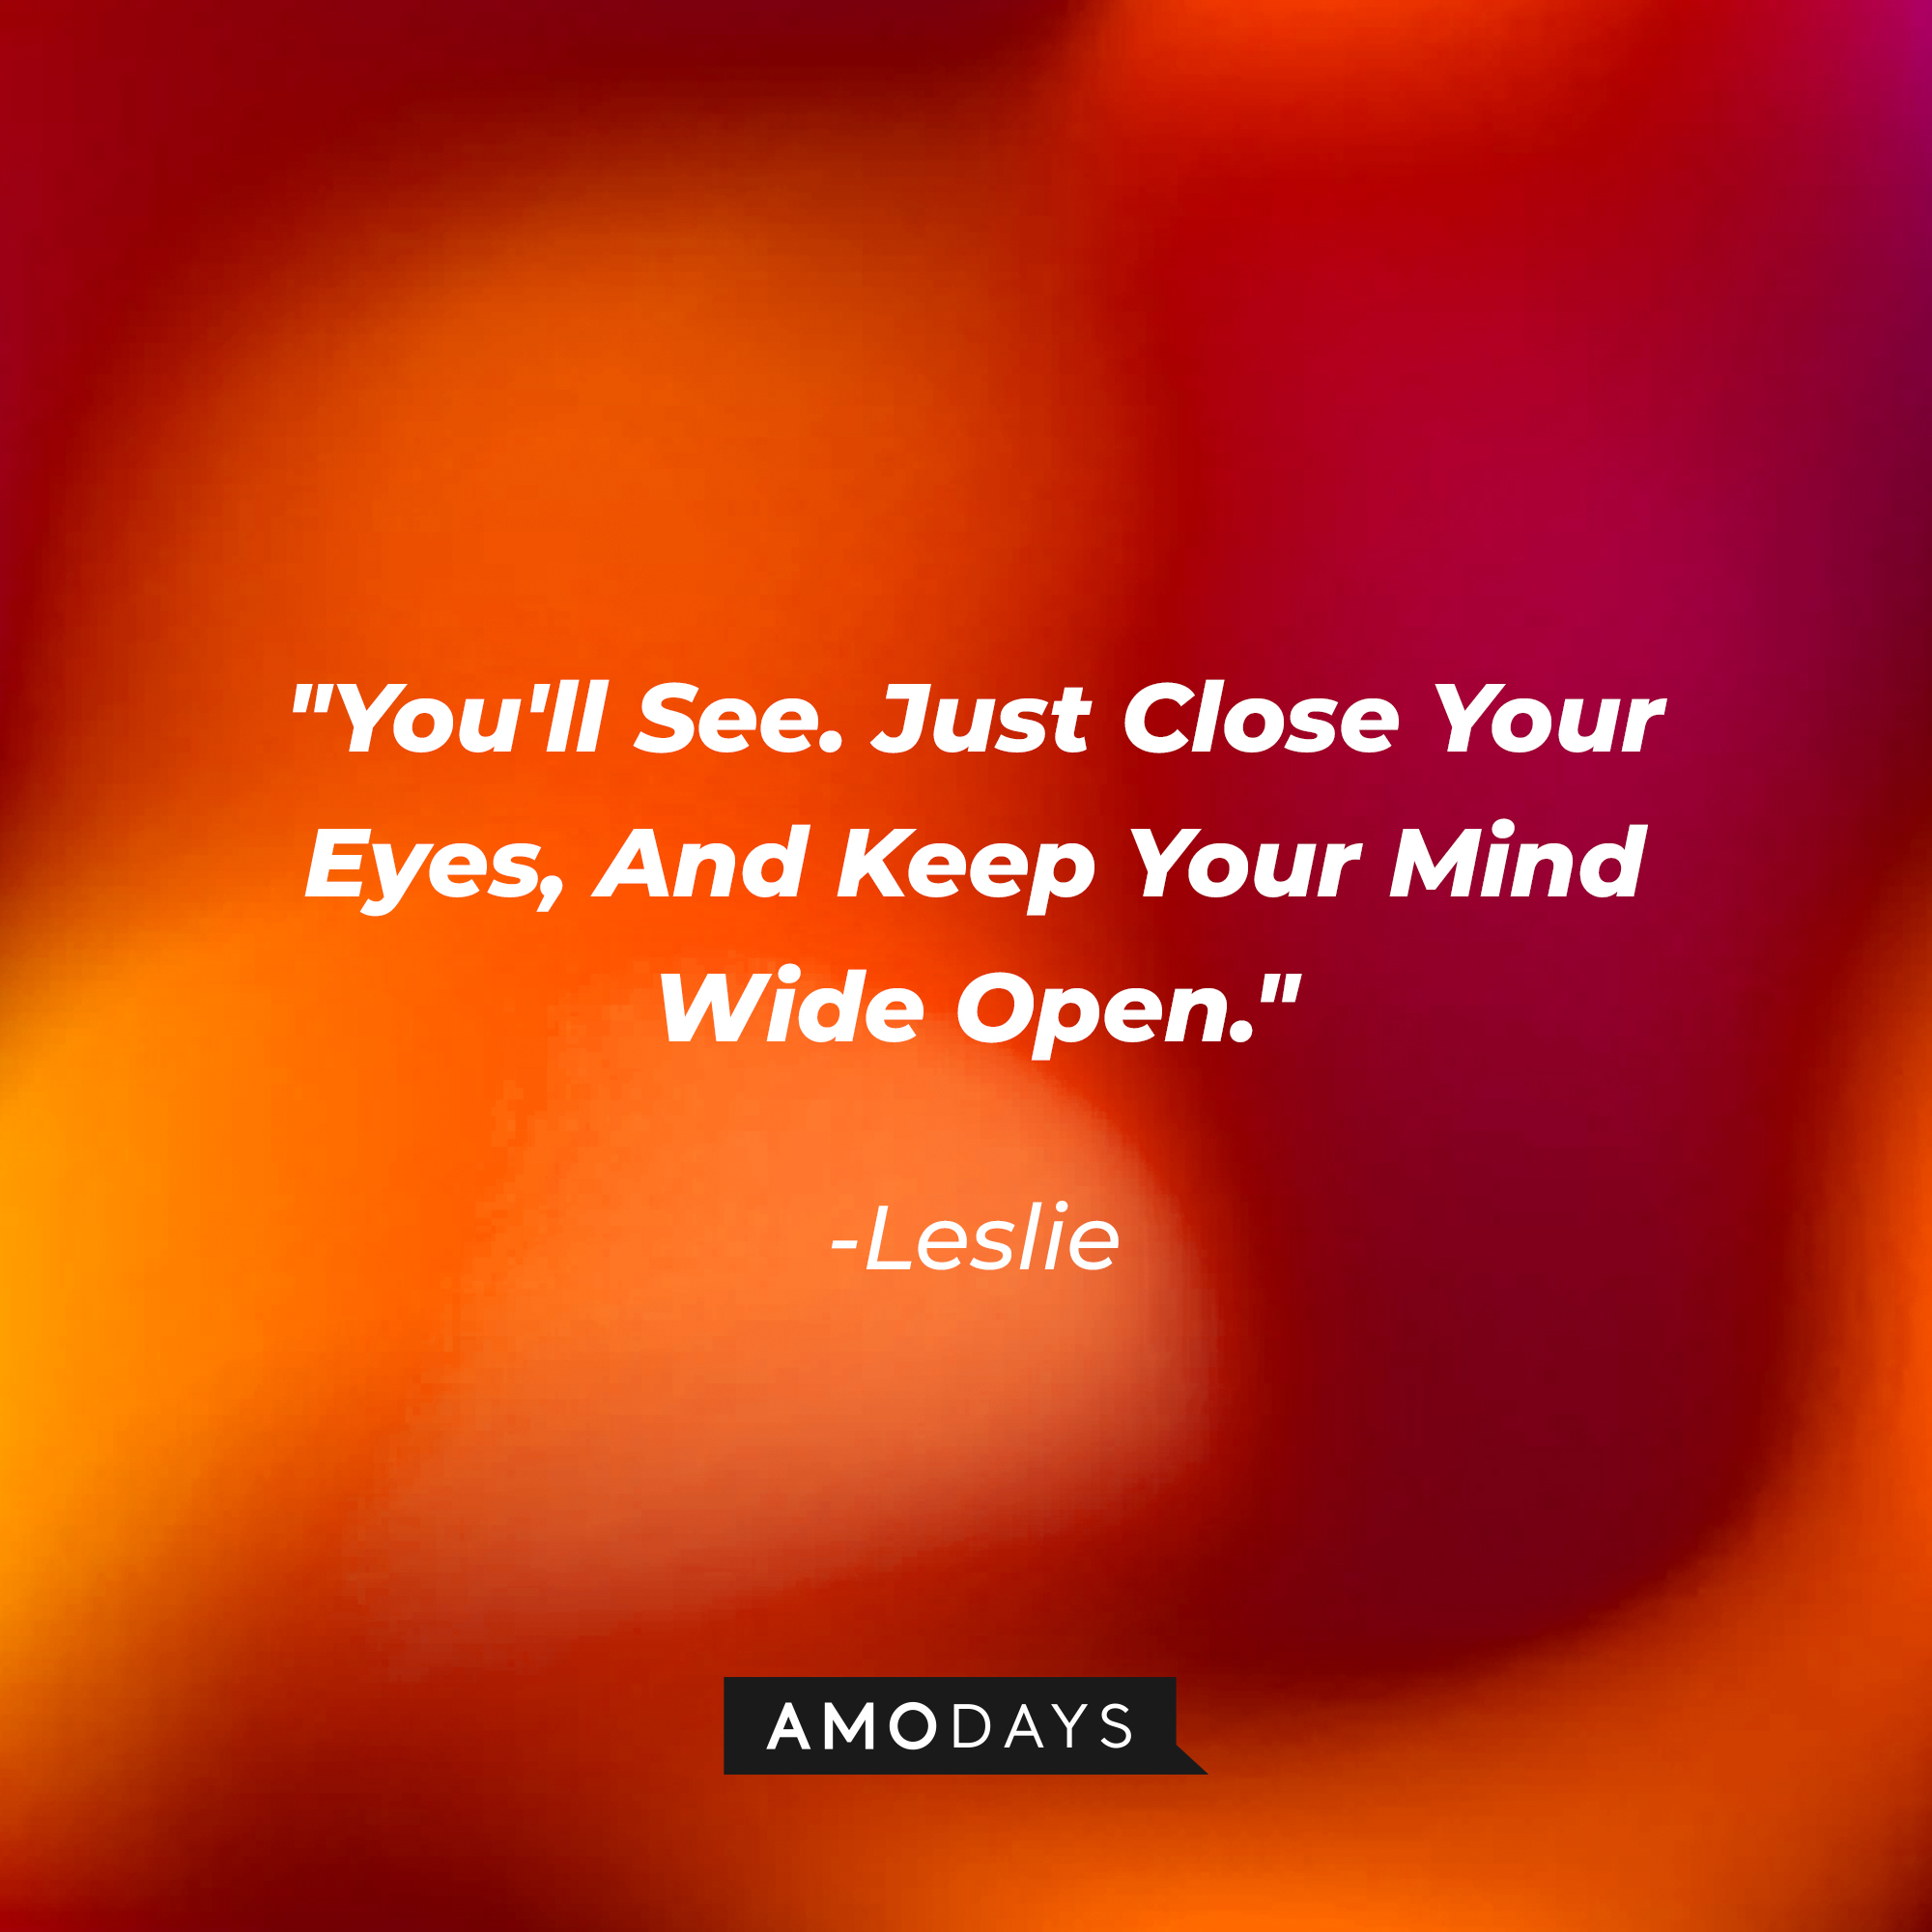 Leslie's quote: "You'll See. Just Close Your Eyes, And Keep Your Mind Wide Open." | Source: Amodays